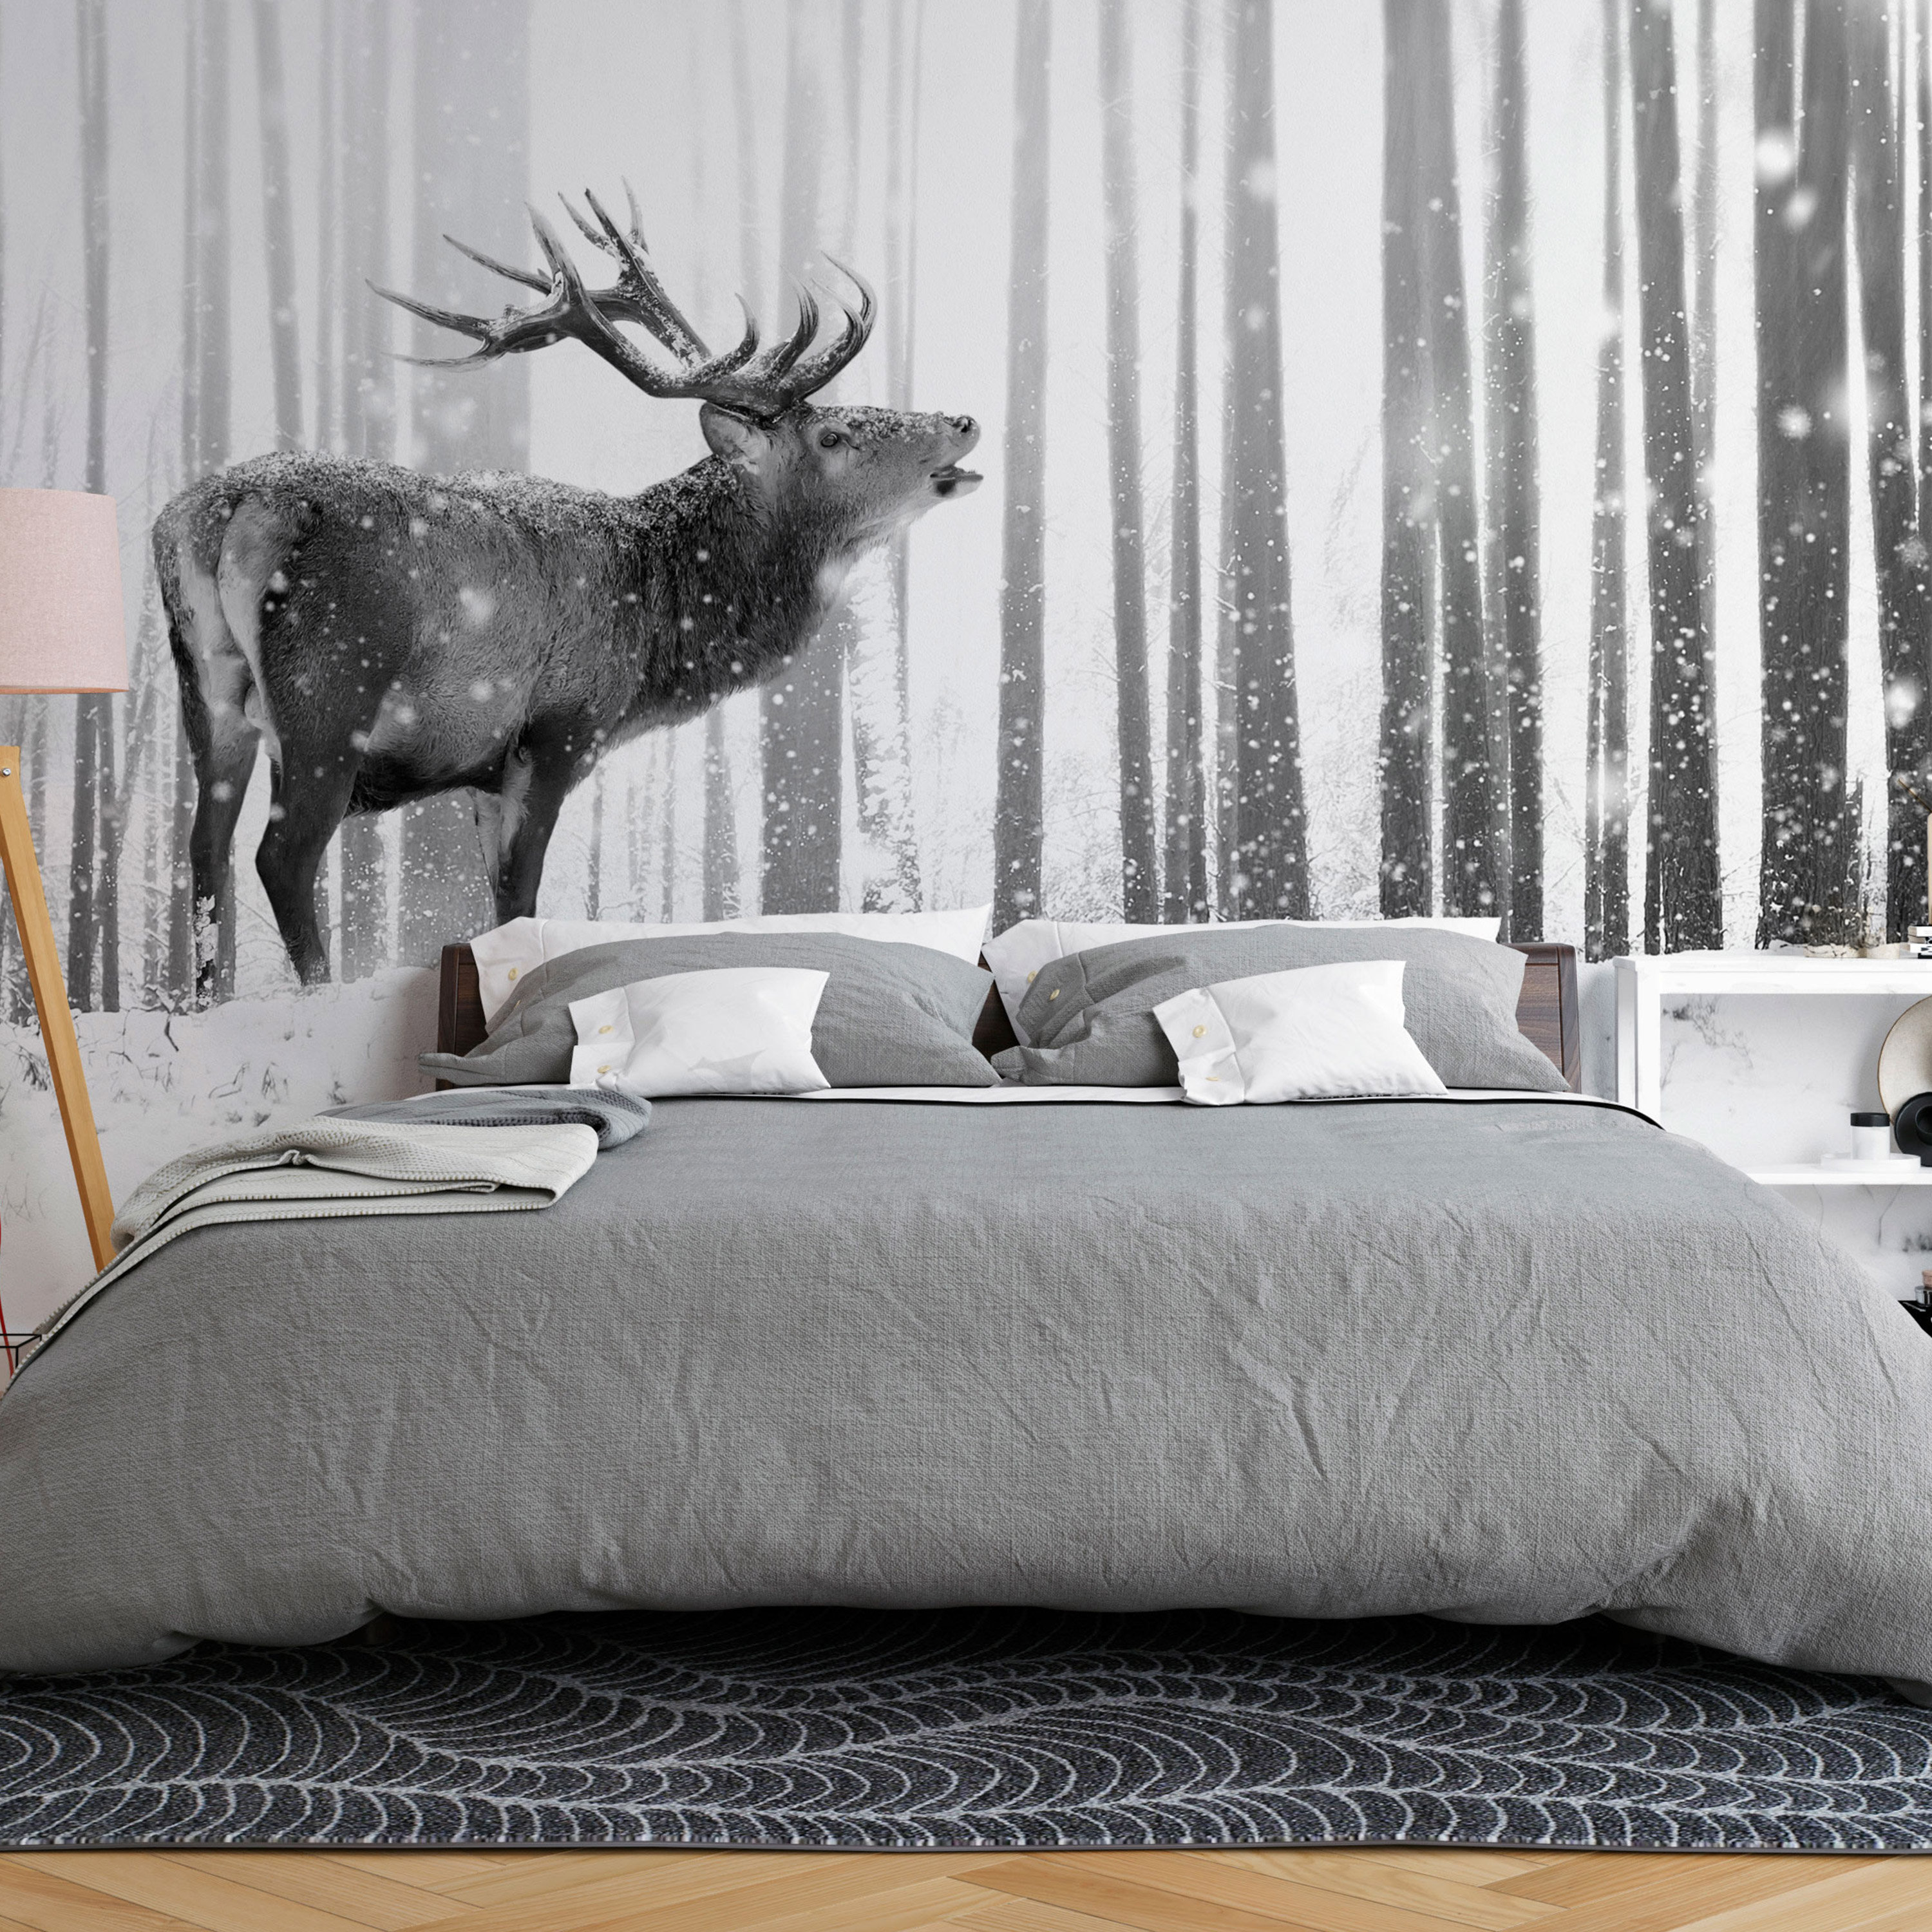 Wallpaper - Deer in the Snow (Black and White) - 450x315